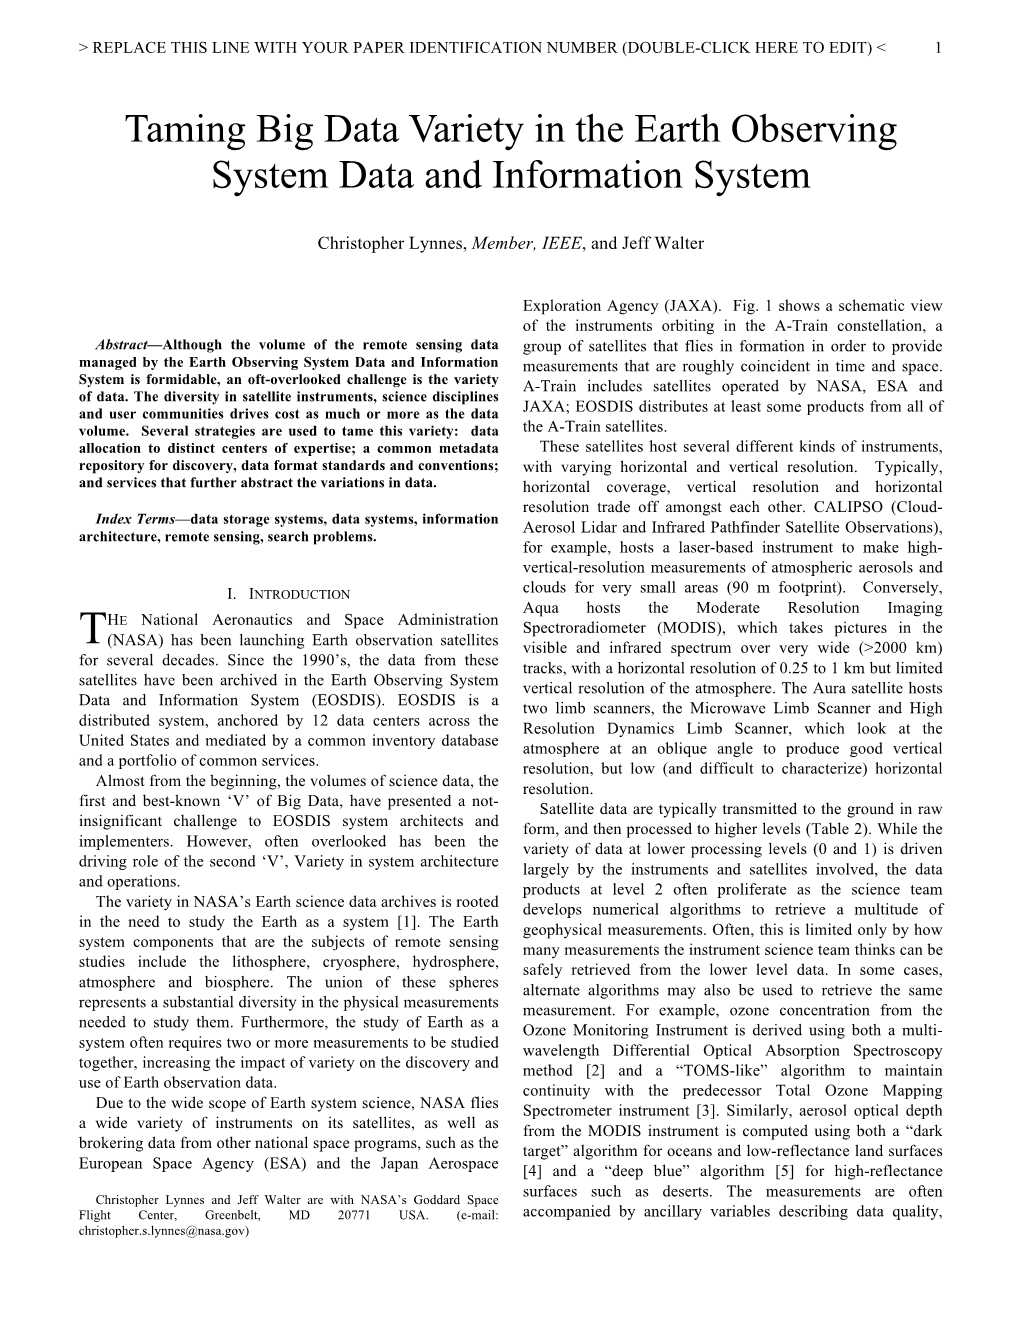 Taming Big Data Variety in the Earth Observing System Data and Information System